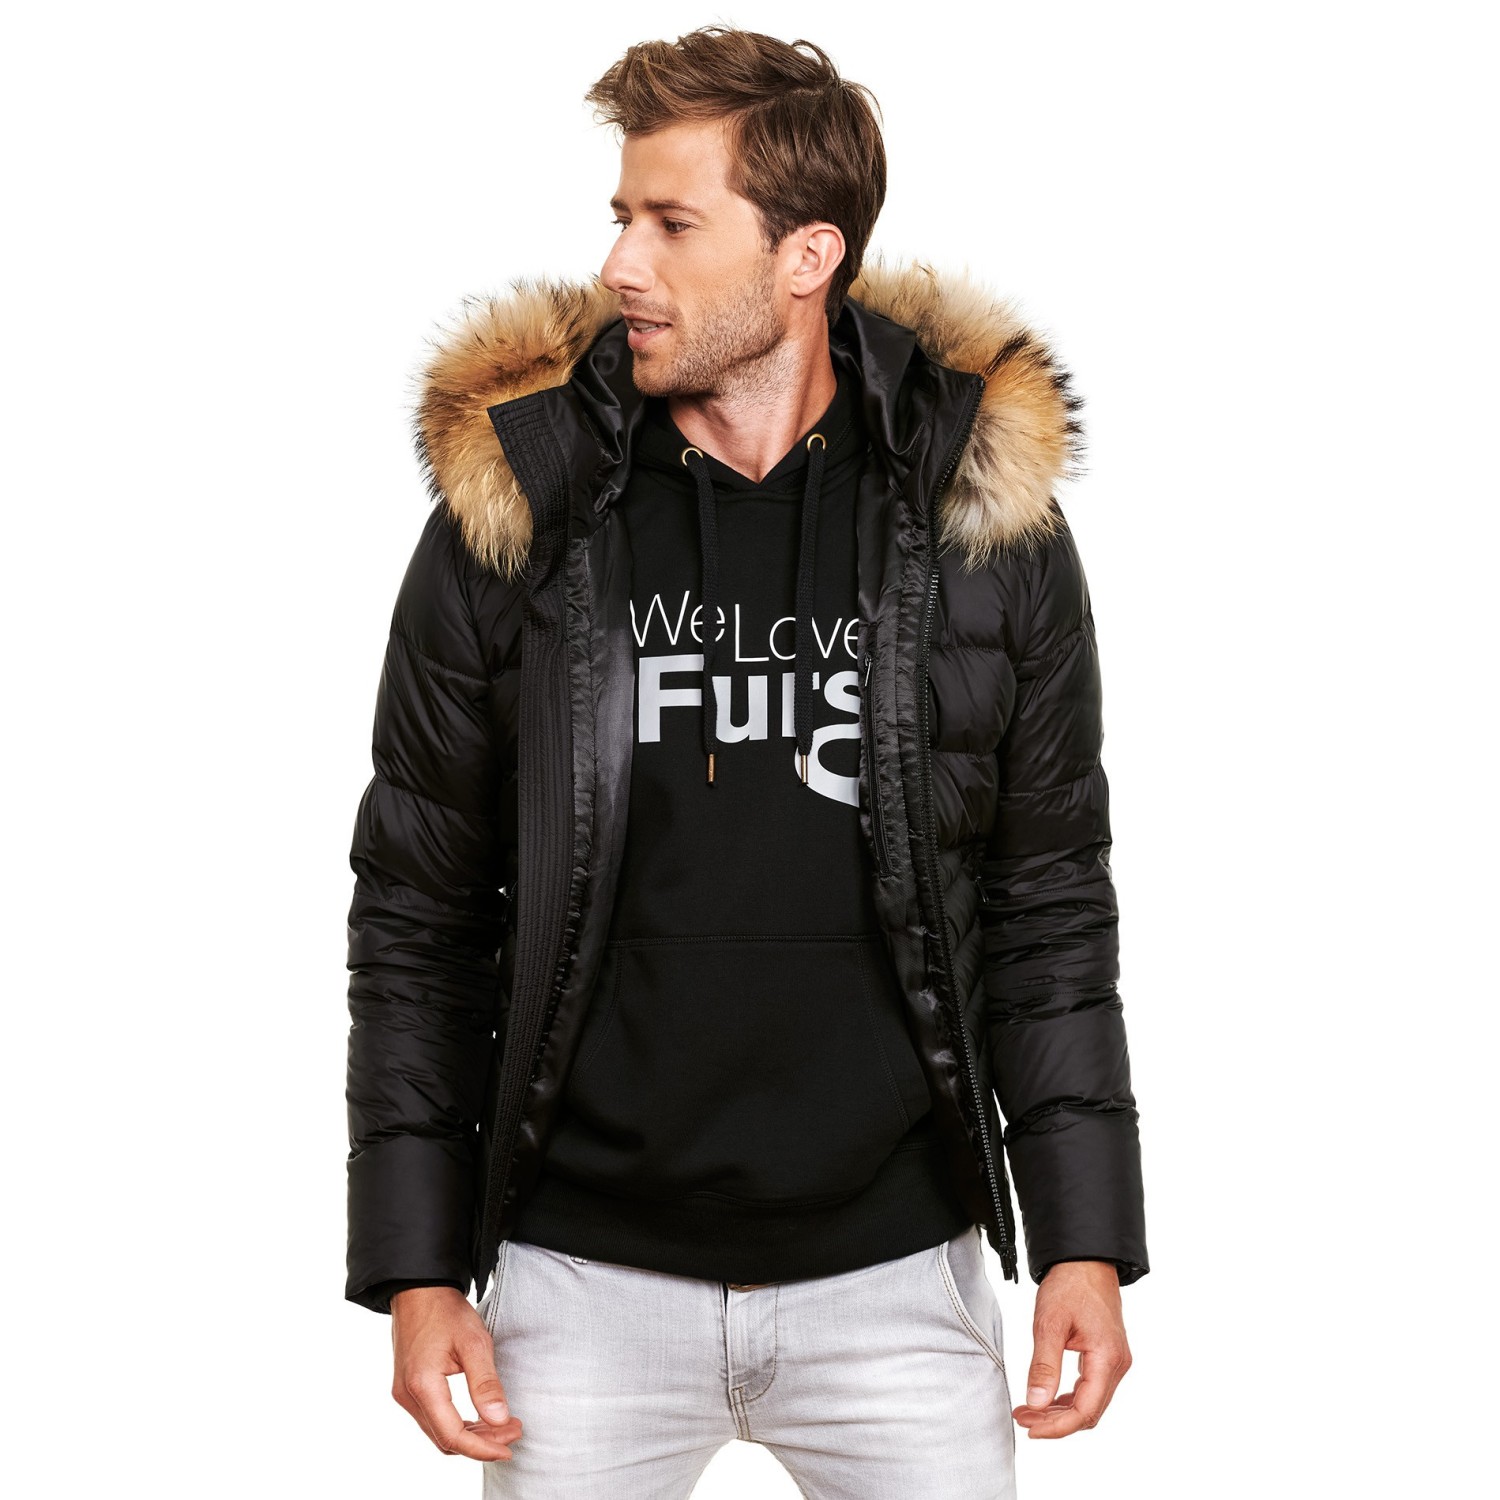 Men’s Down Jacket with Fur "CORPORAL"